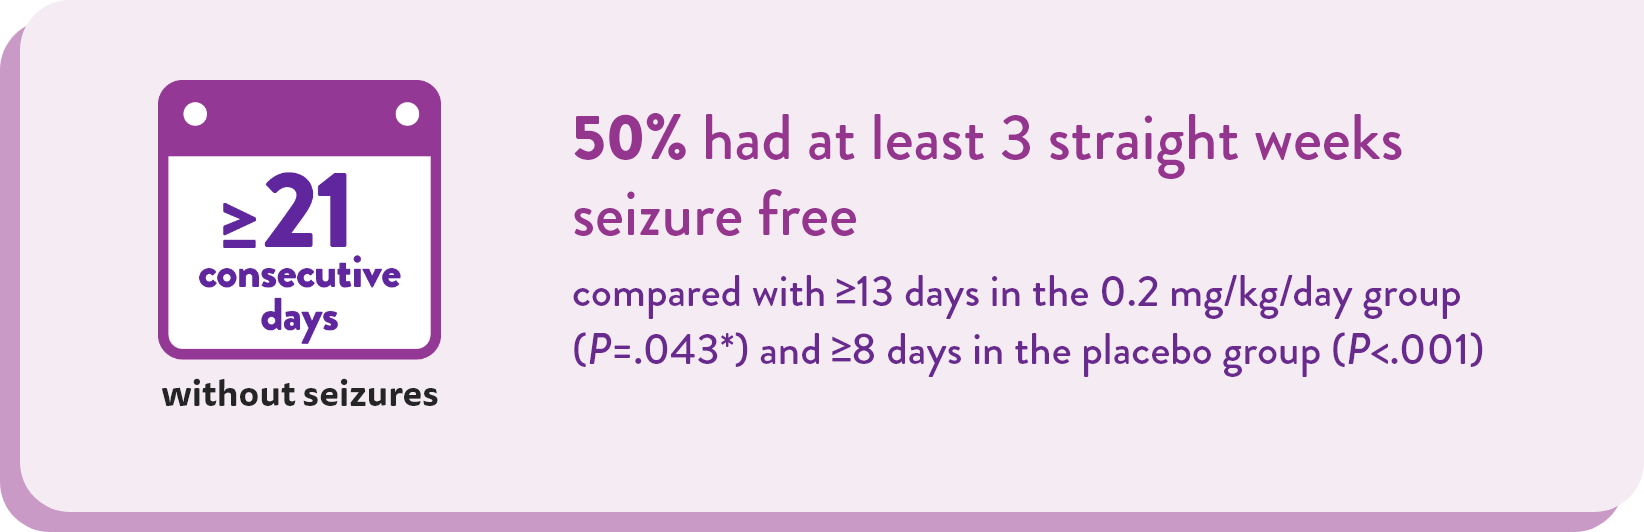 Figure showing 50% of patients with Dravet syndrome treated with FINTEPLA® had at least 3 straight weeks seizure free.